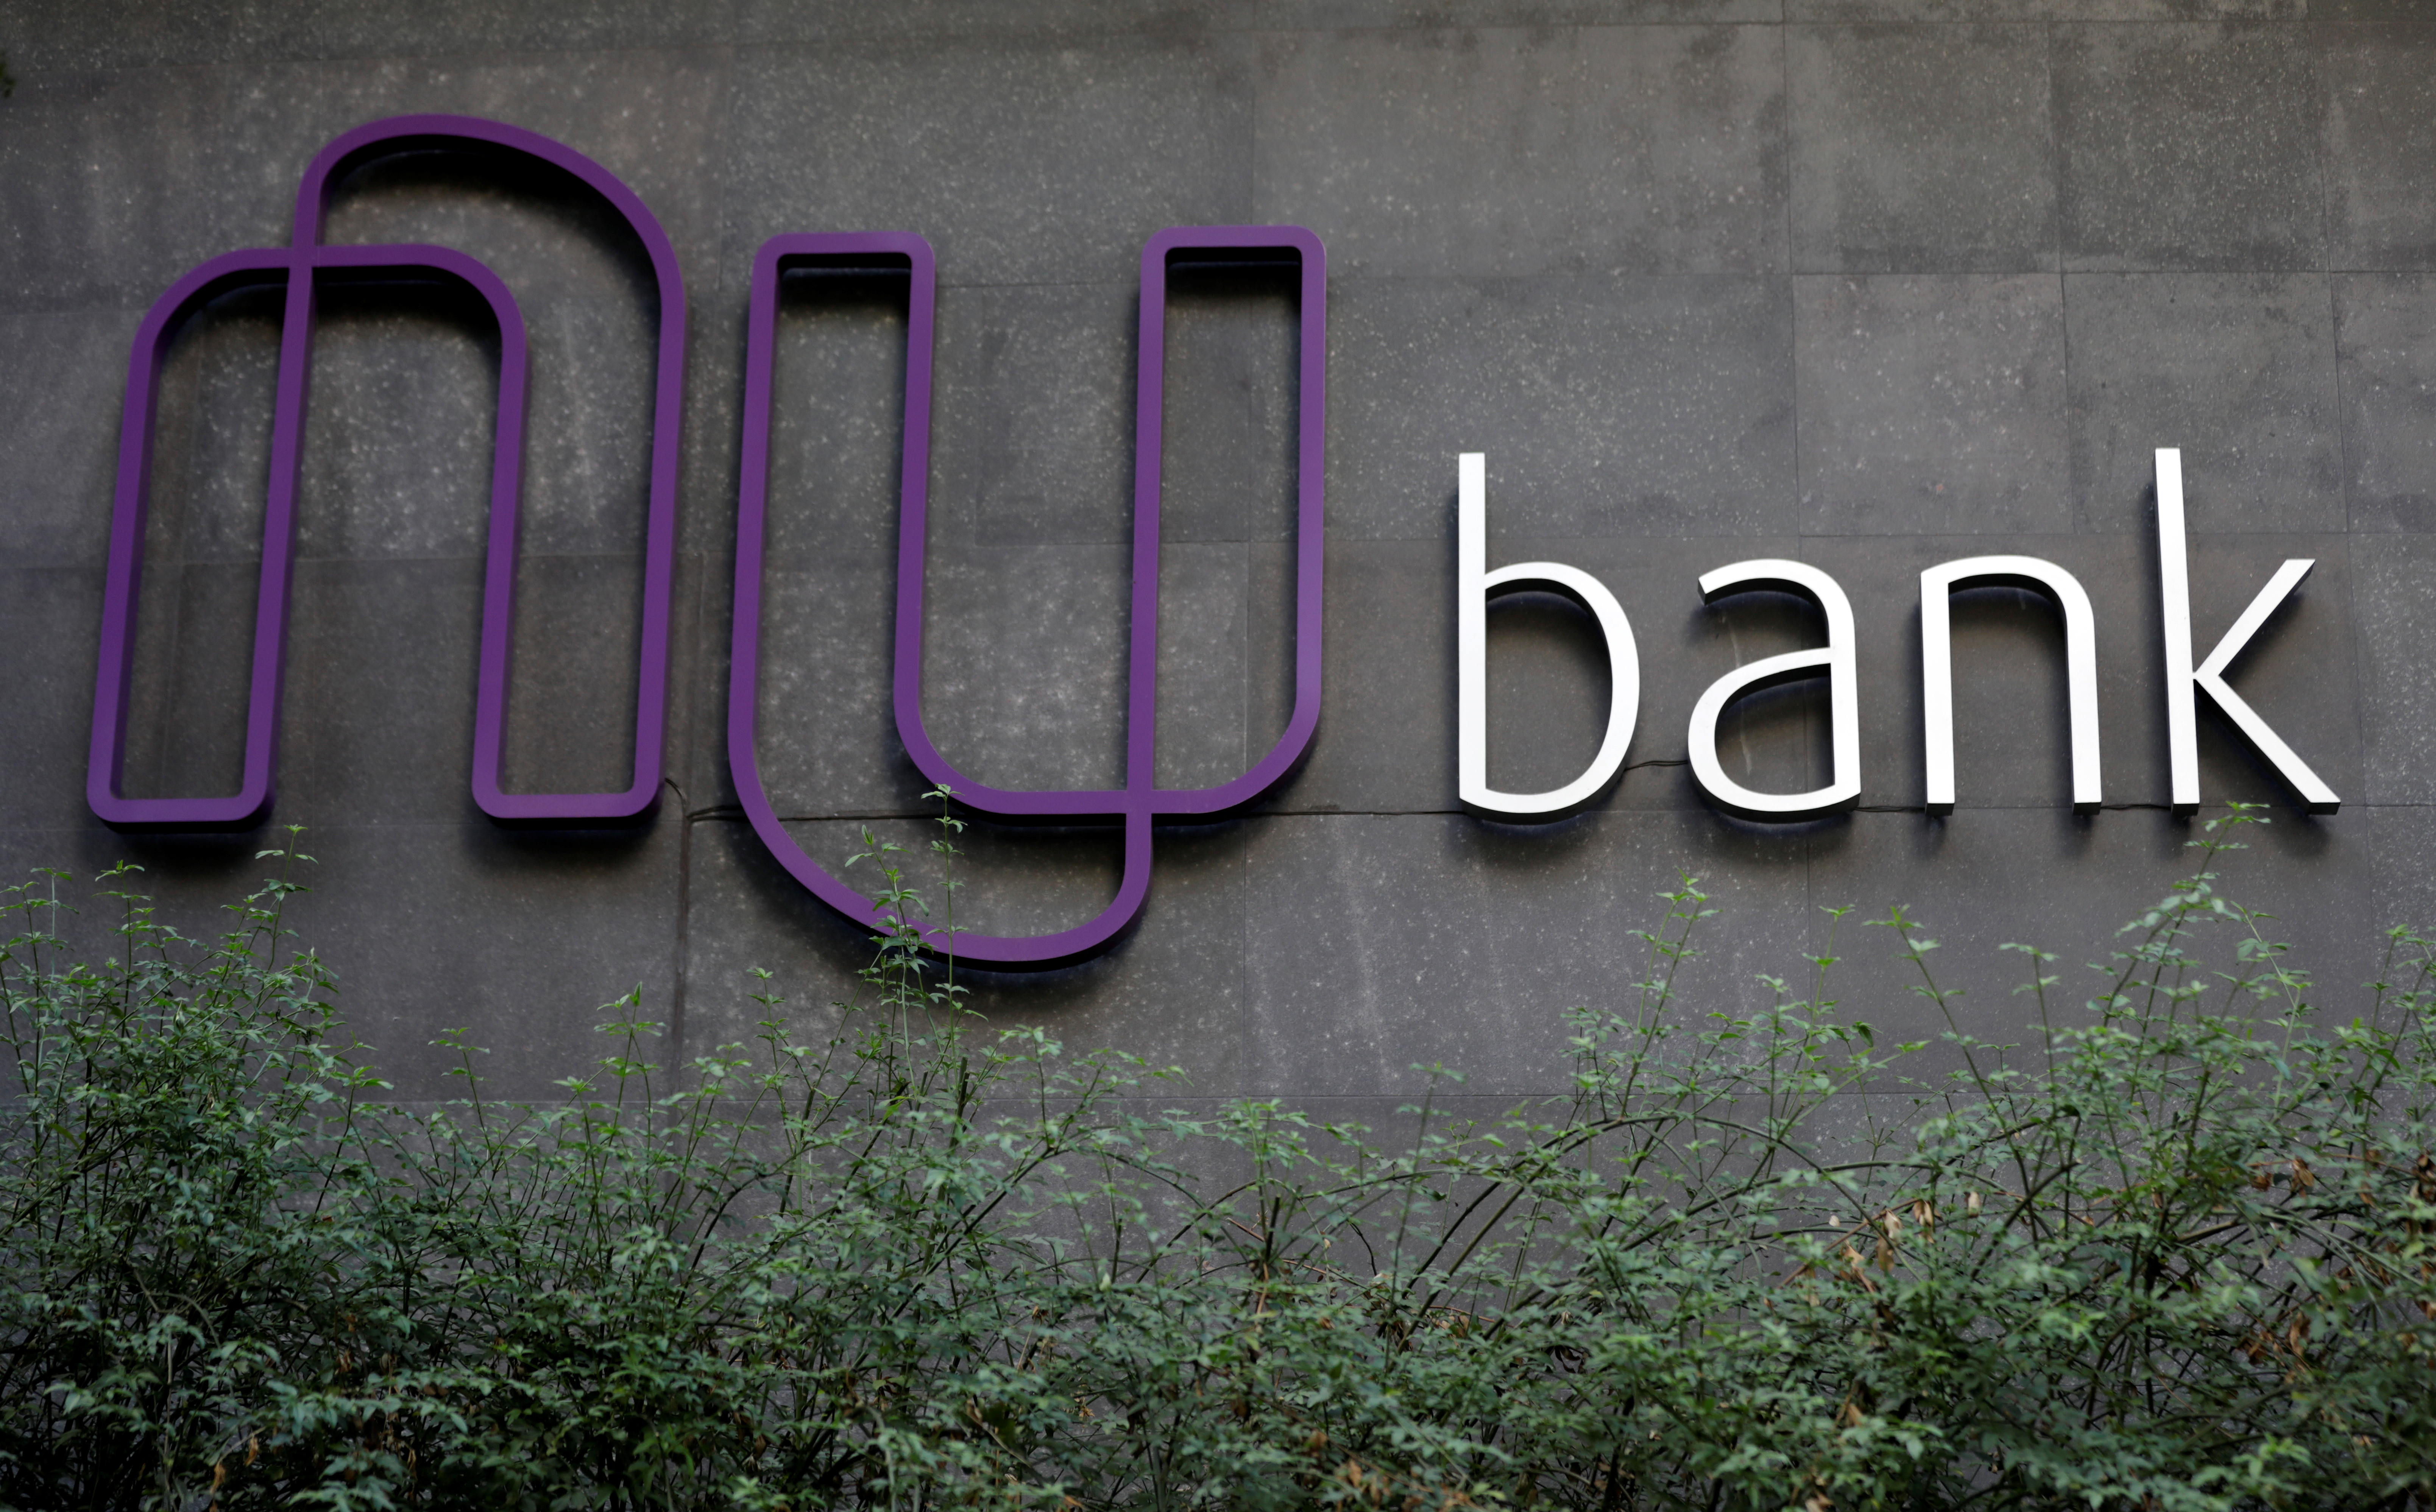 The logo of Nubank, a Brazilian FinTech startup, is pictured at the bank's headquarters in Sao Paulo, Brazil June 19, 2018. Picture taken June 19, 2018. REUTERS/Paulo Whitaker/Files